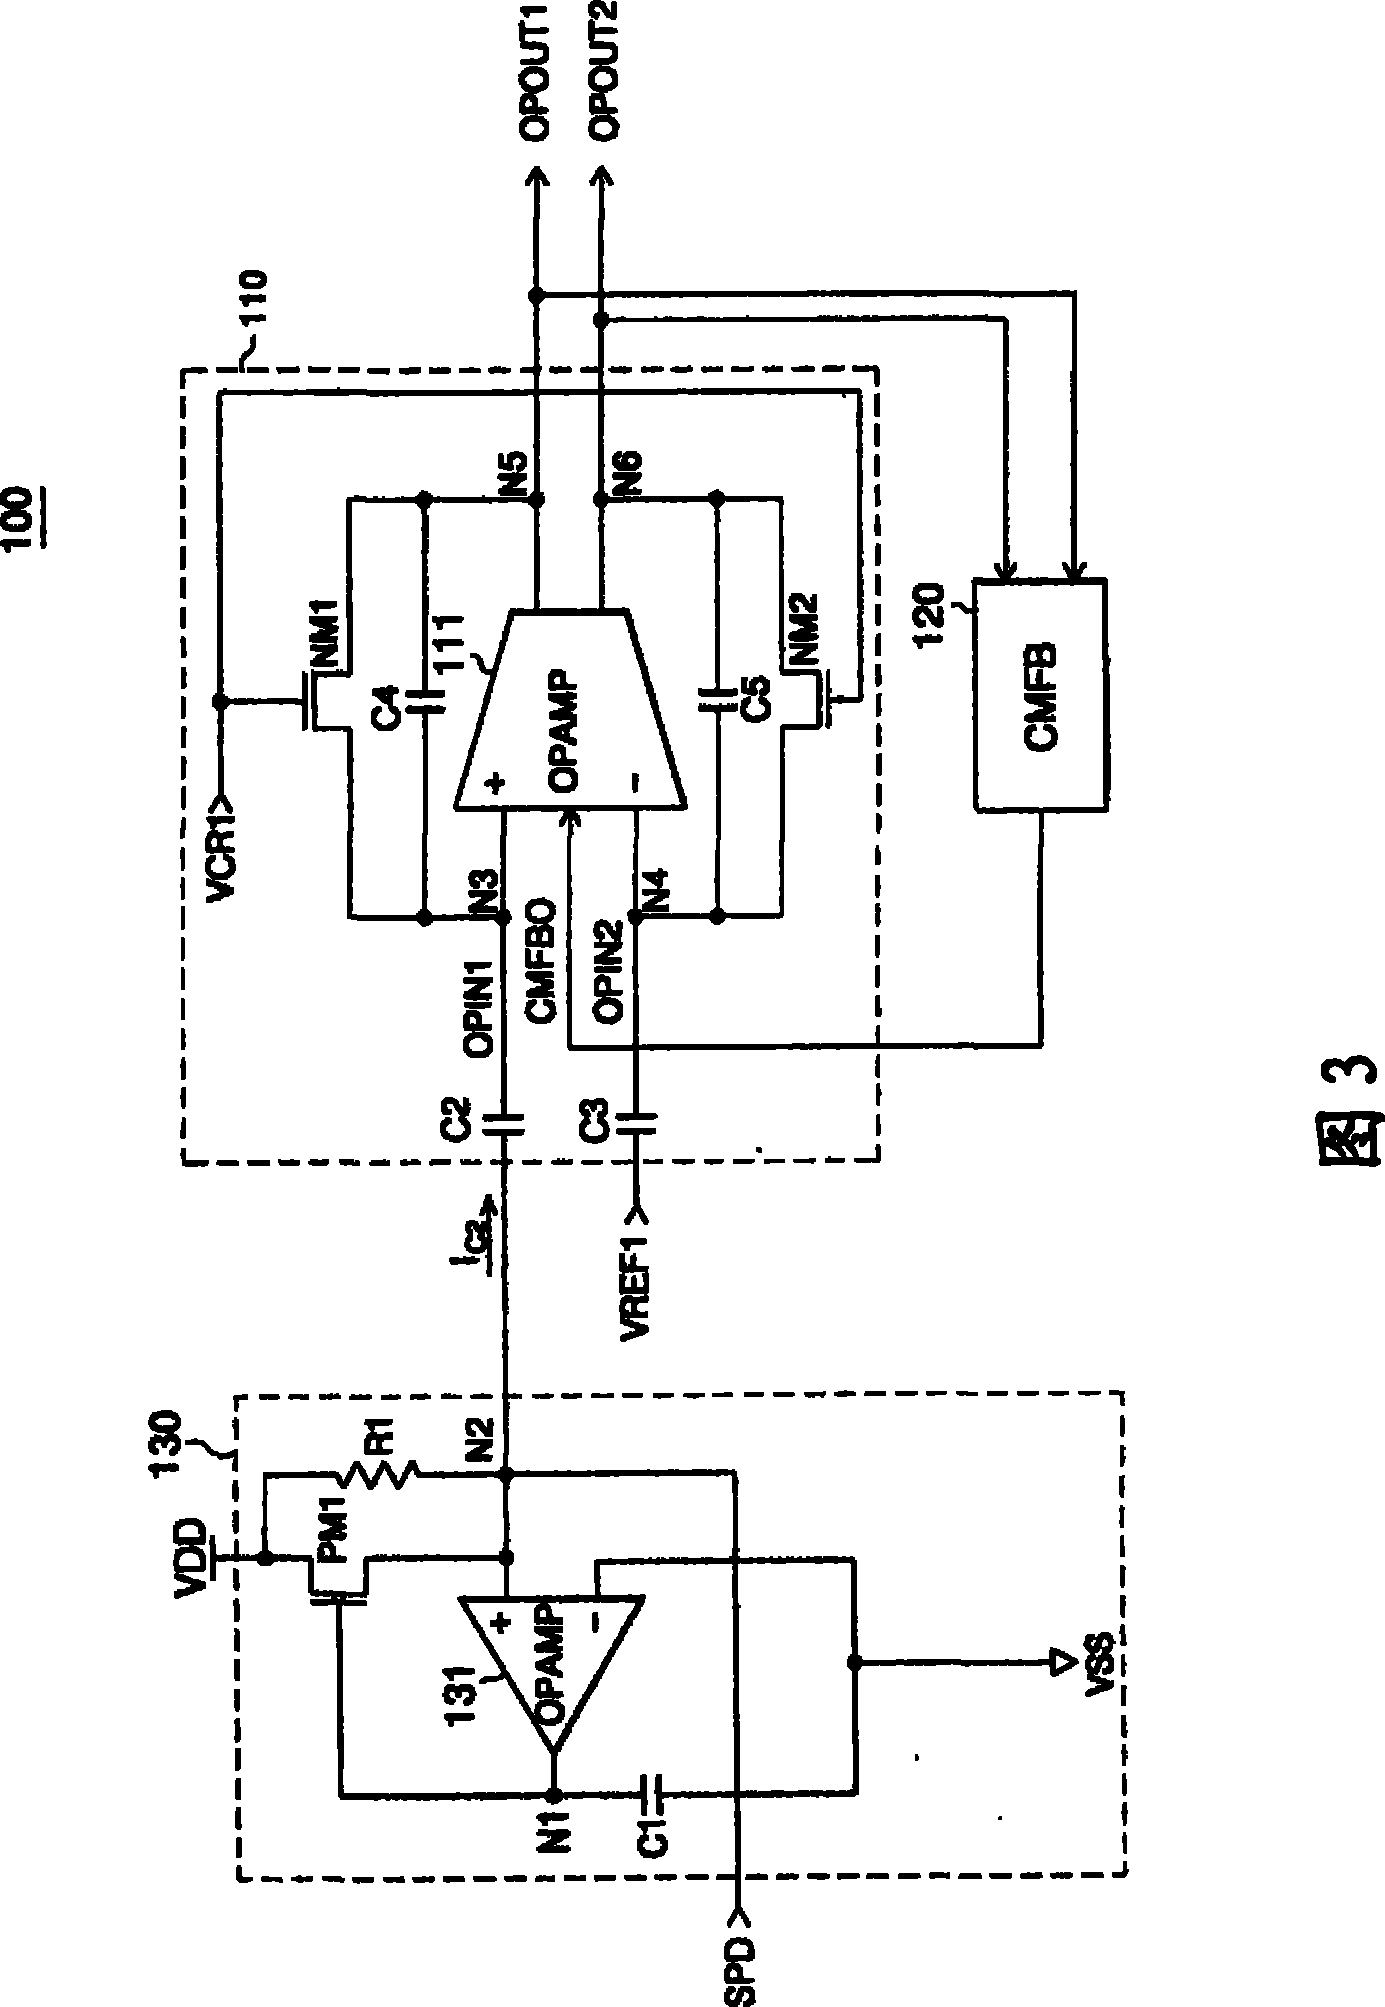 Infrared remote controller receiver having semiconductor signal processing device designed by only CMOS process